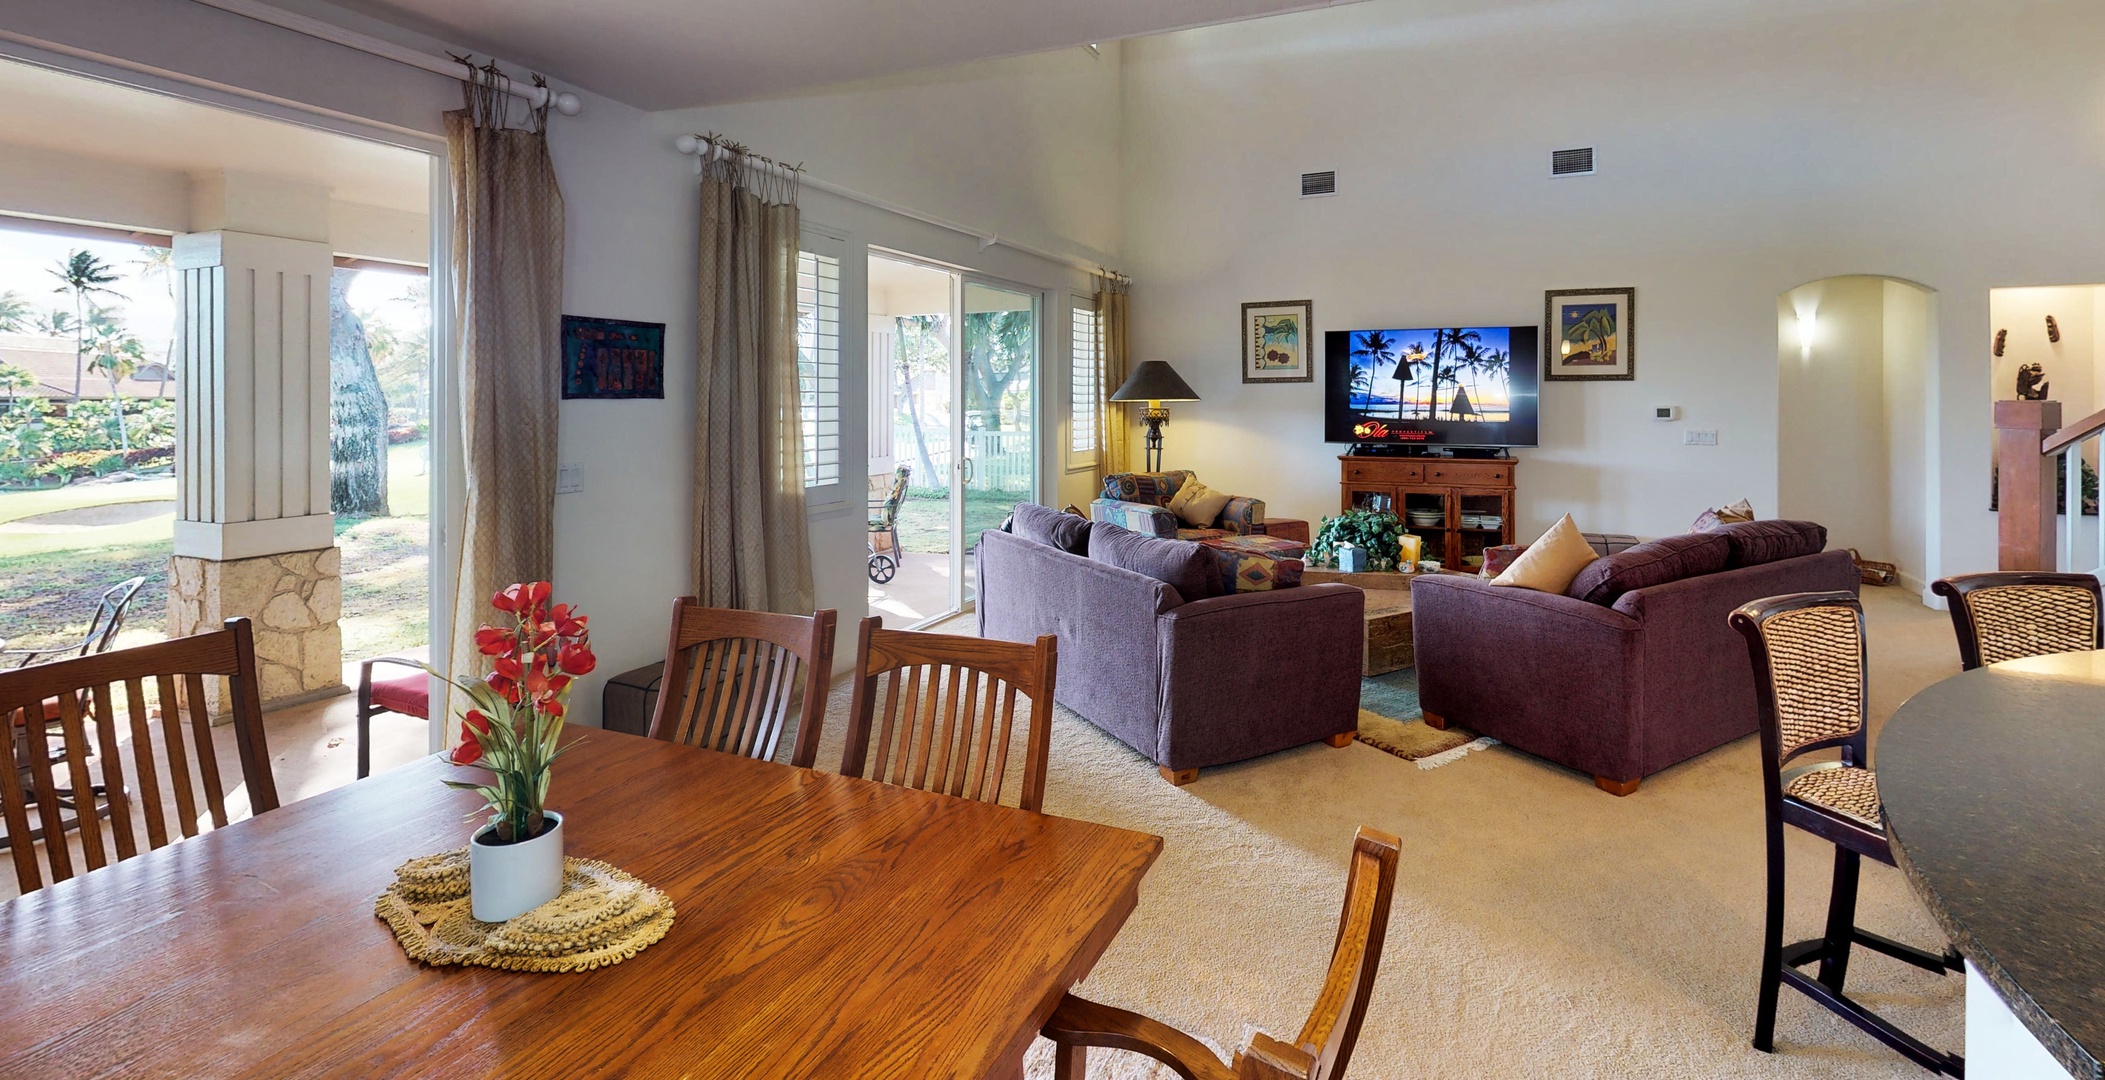 Kapolei Vacation Rentals, Ko Olina Kai Estate #17 - Easy flow from the dining, living and kitchen areas with an open floorplan.